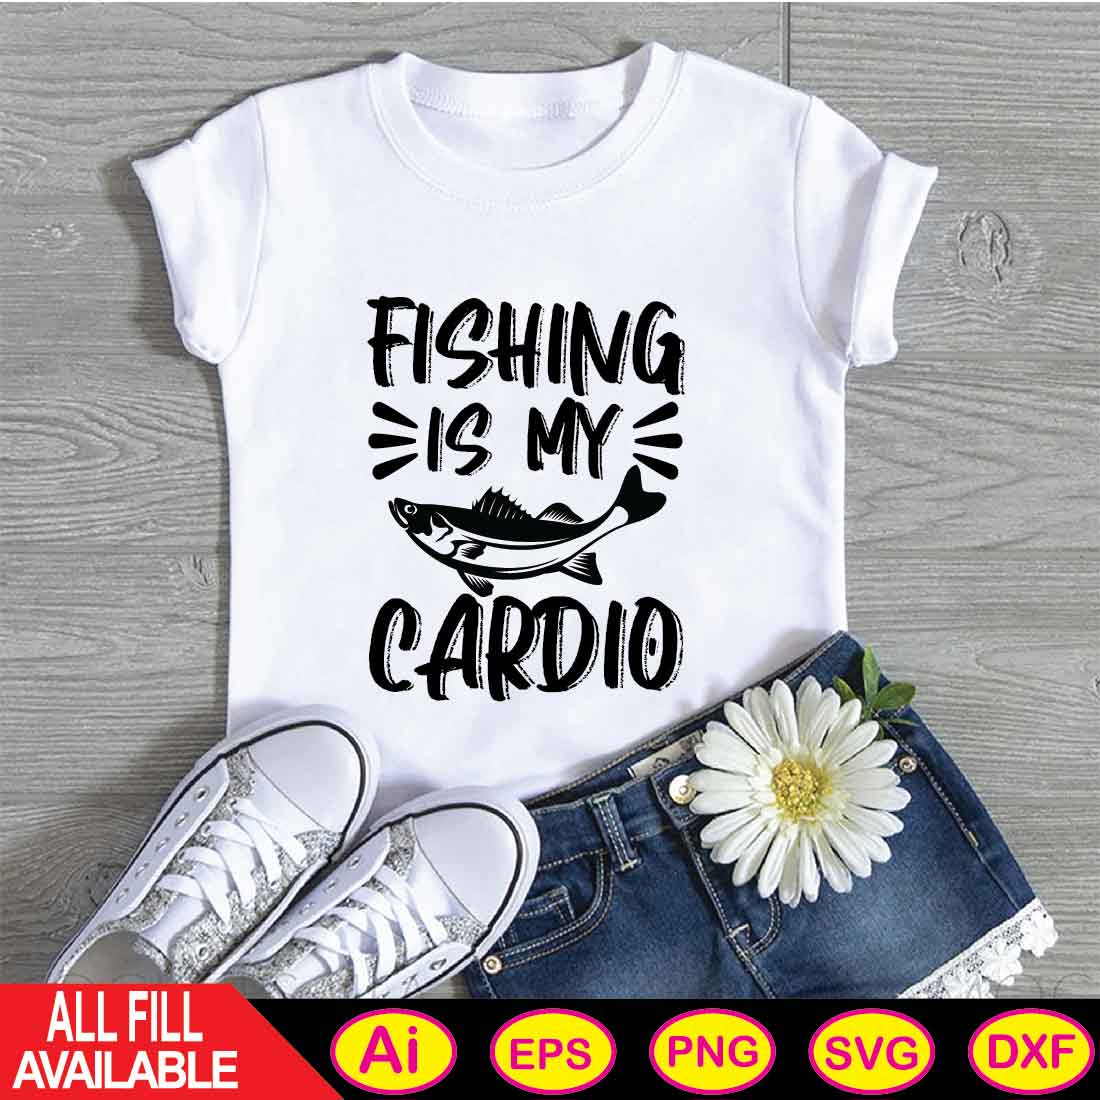 Fishing Is My Cardio t-shirt design cover image.